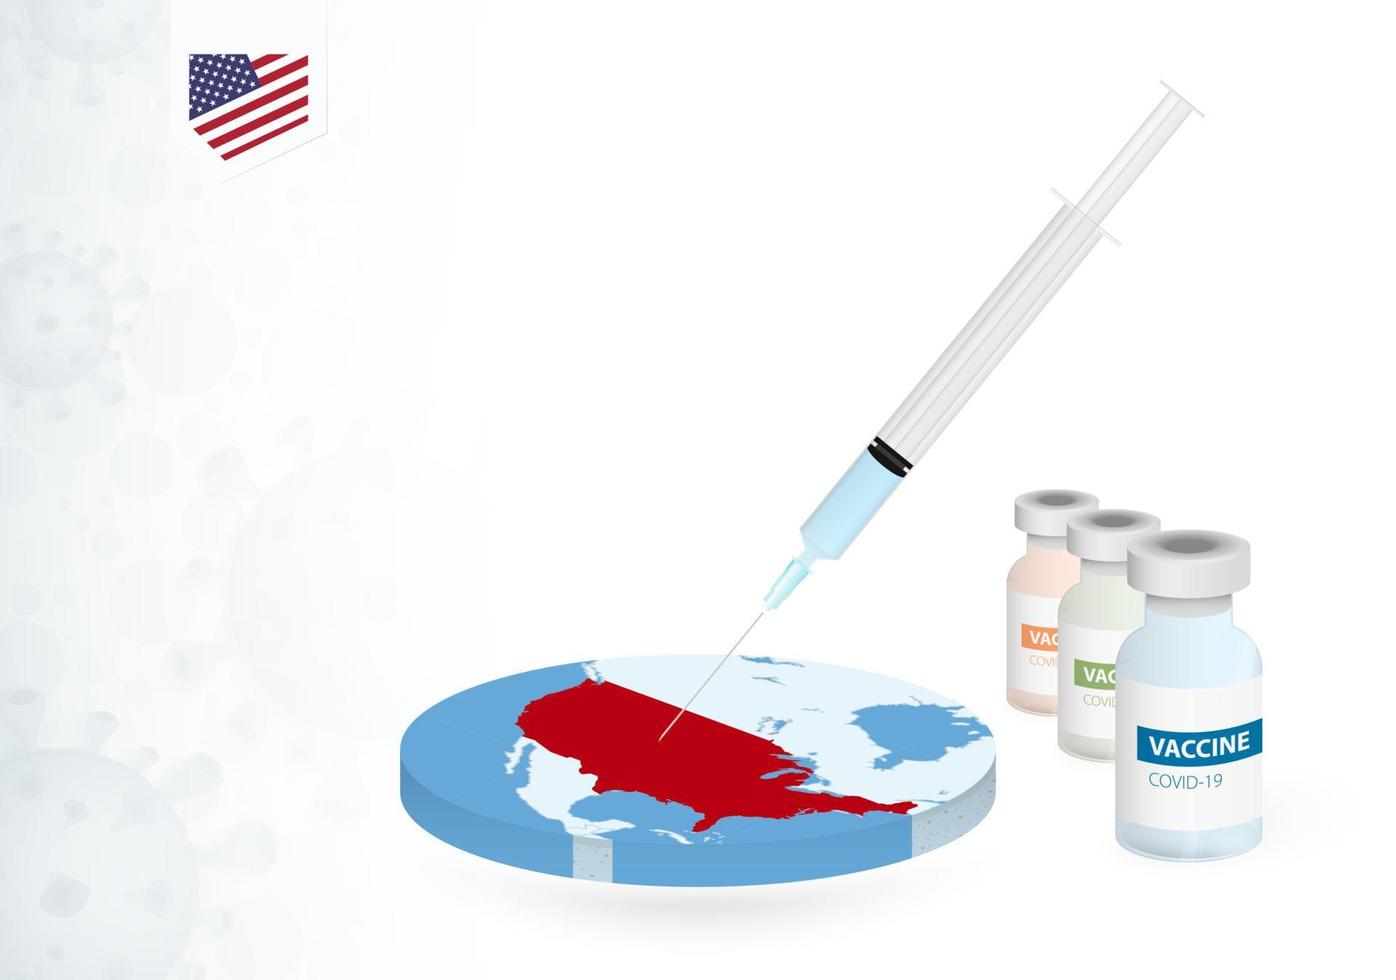 Vaccination in USA with different type of COVID-19 vaccine. Concept with the vaccine injection in the map of USA. vector